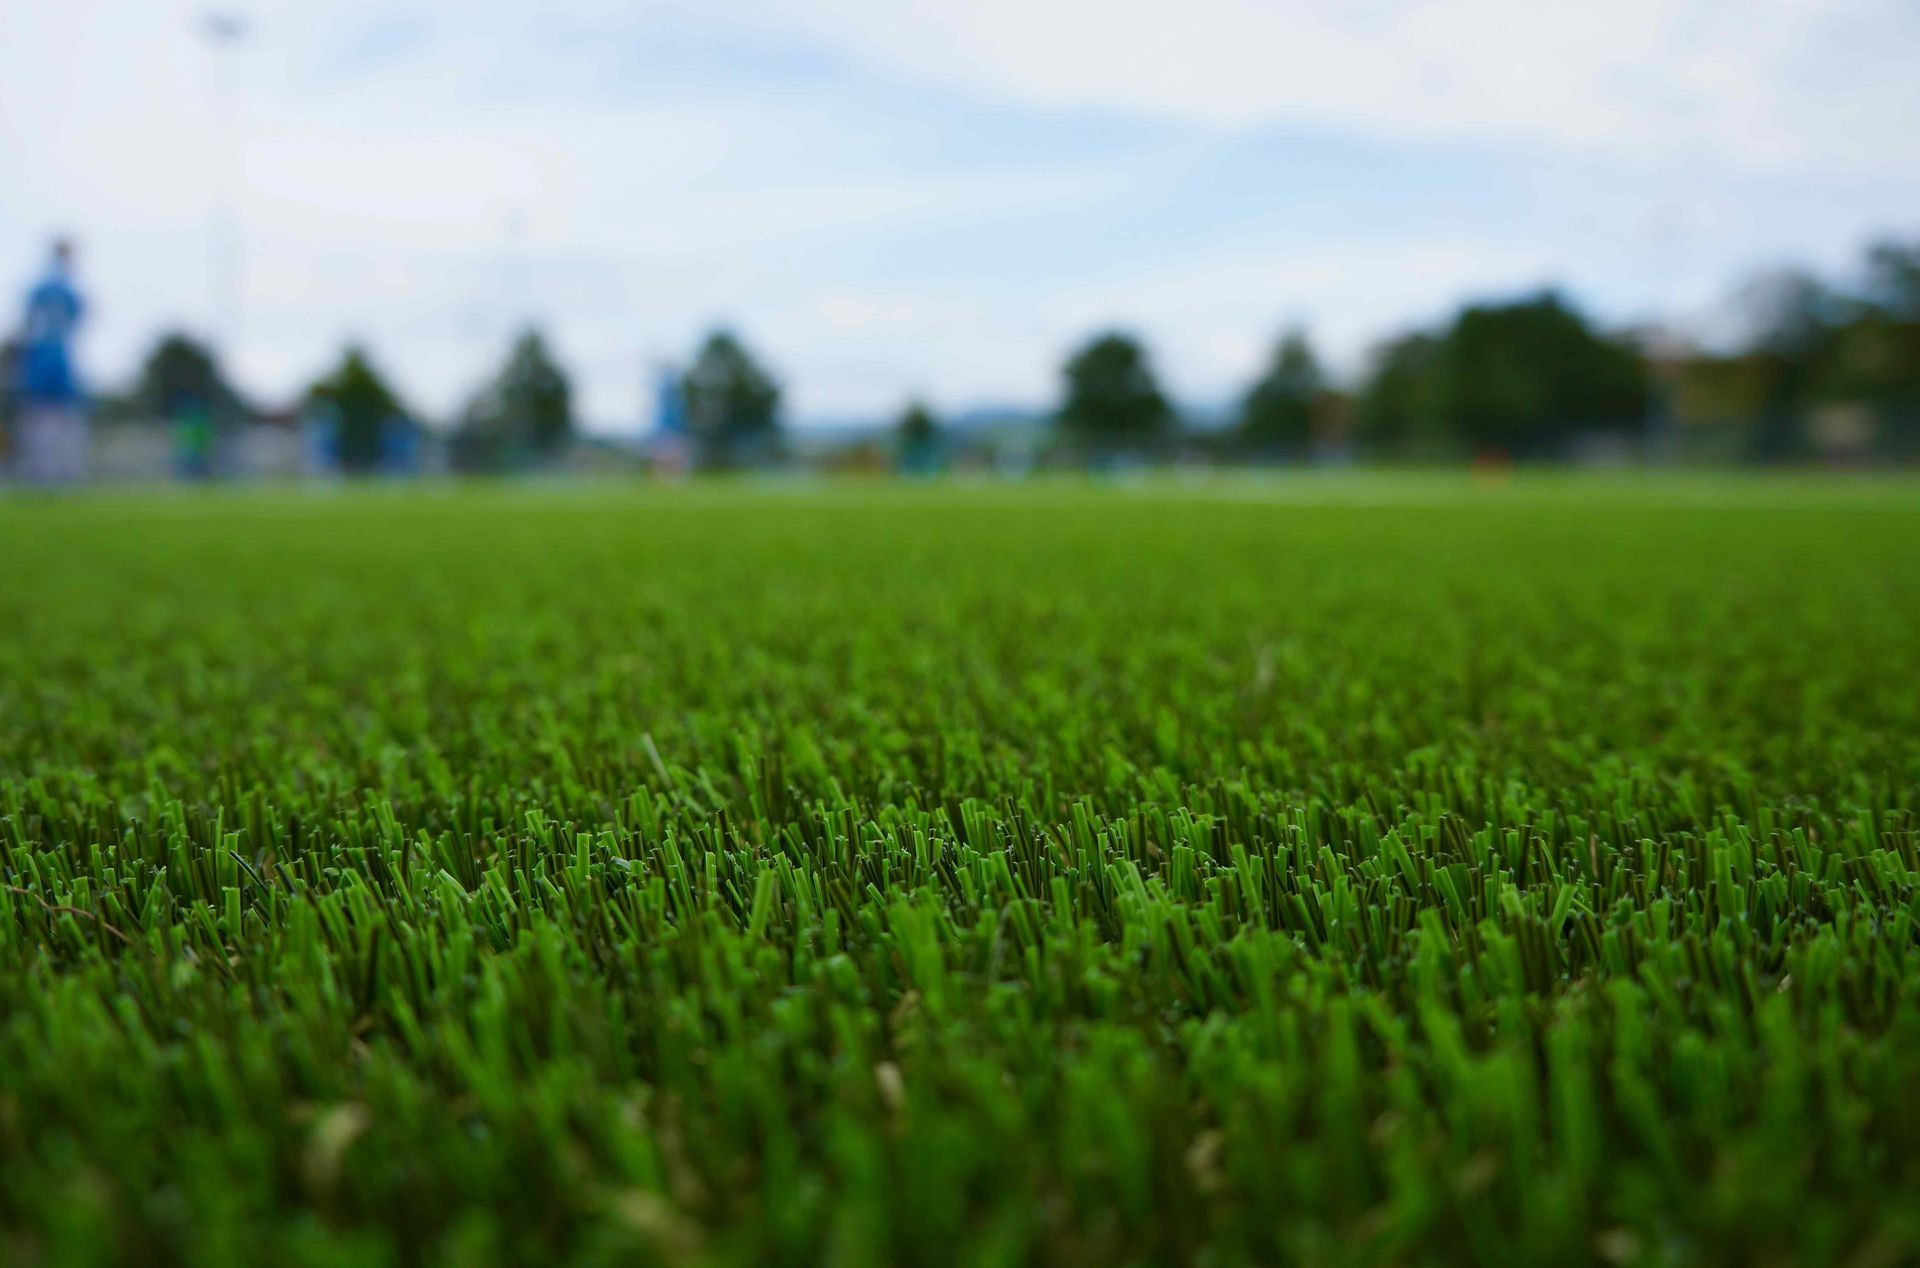 Artificial grass for a dog park in chandler arizona